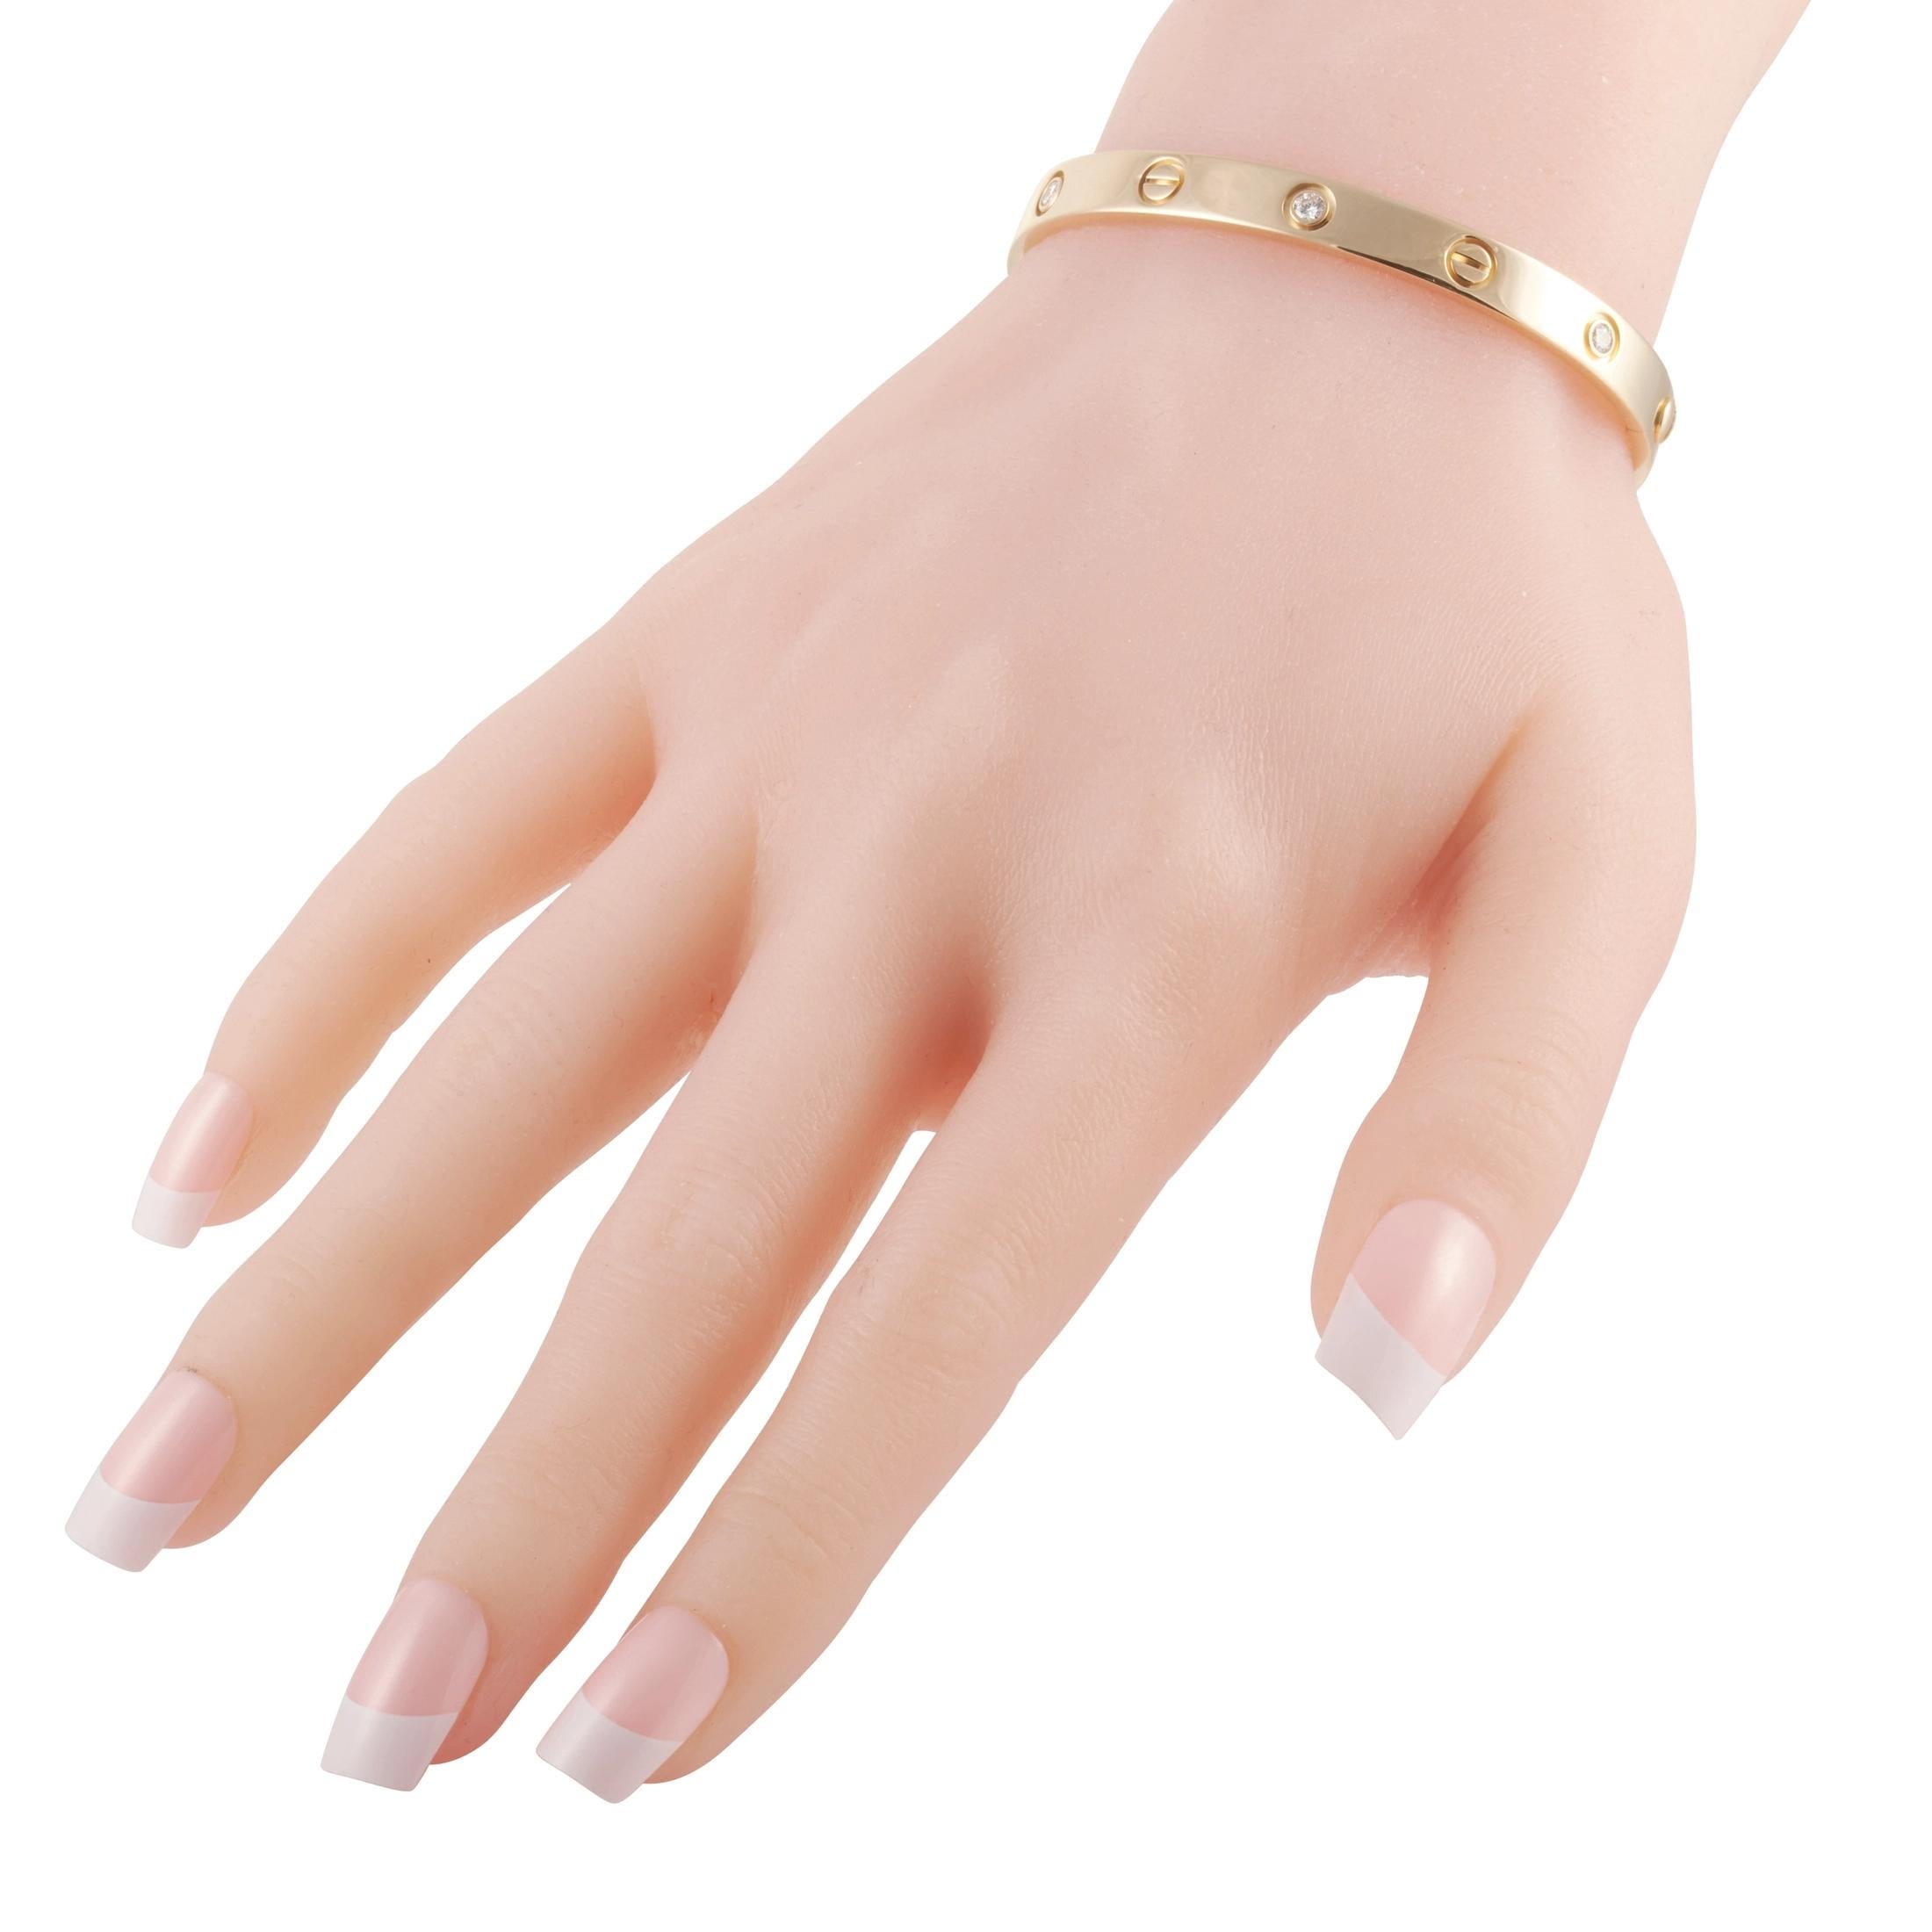 Nothing says “luxury” quite like this iconic Love Bracelet from Cartier. An iconic design that is instantly recognizable, glistening 18K Yellow Gold provides the perfect backdrop for stylish screw accents and 4 glittering diamonds. This size 16